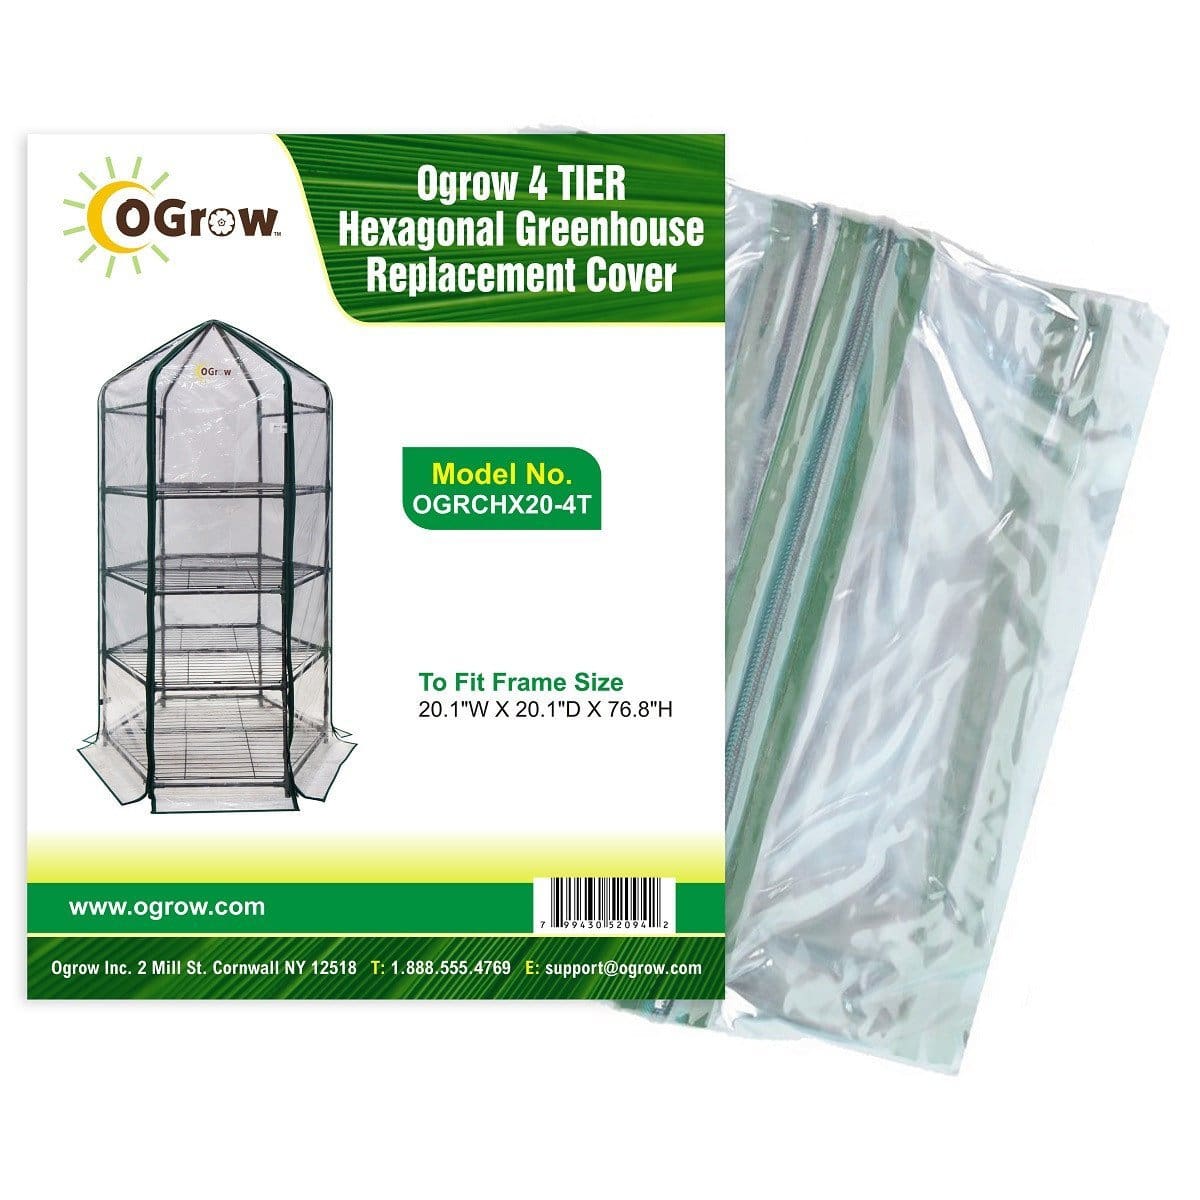 oGrow 4 Tier Hexagonal Greenhouse Replacement Cover - To Fit Frame Size 20 1W X 20 1D X 76 8H - Greenhouses & Accessories